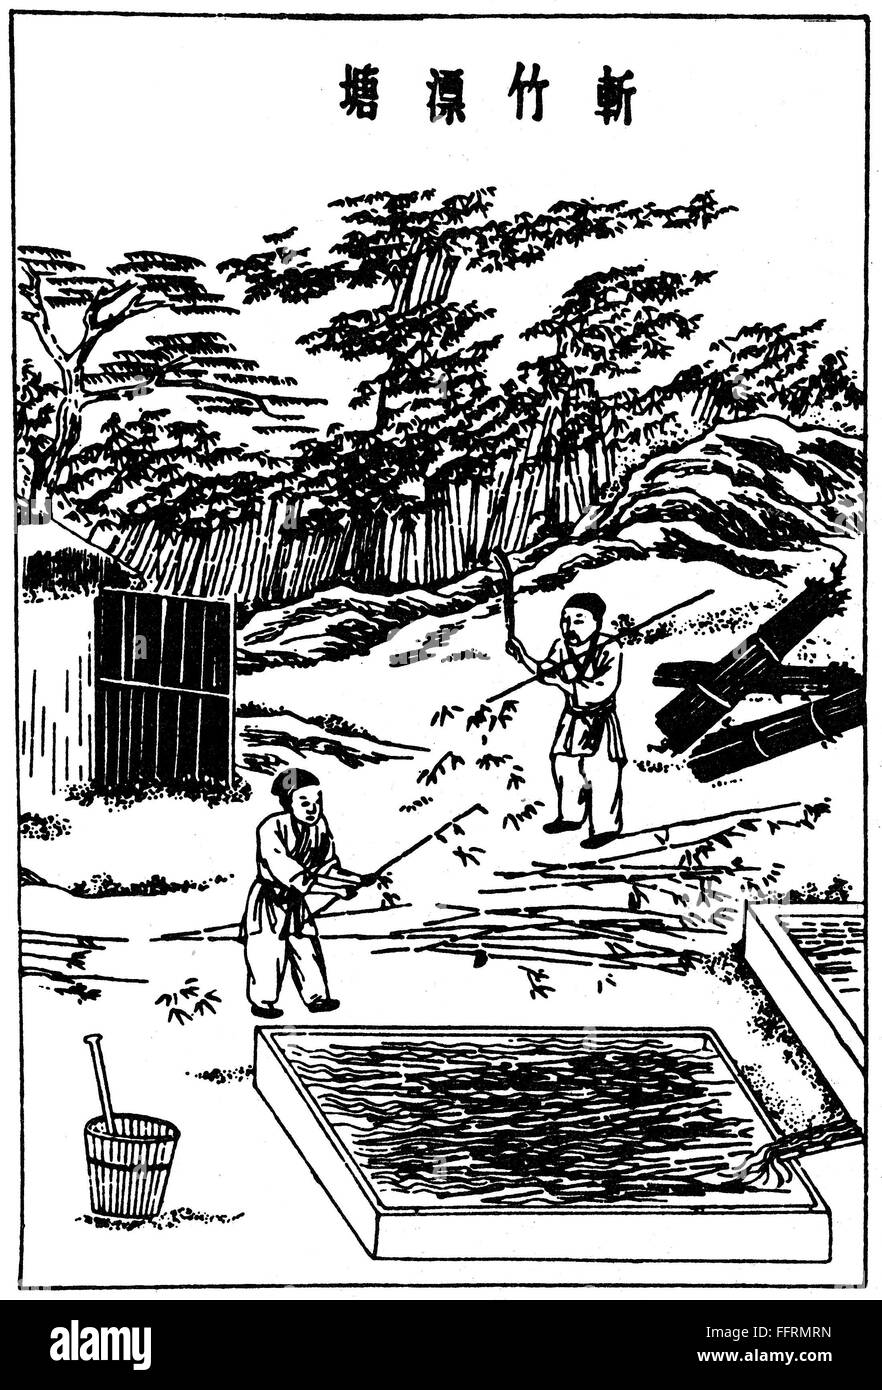 CHINA: PAPER MANUFACTURE. /nBamboo being cut and placed into pools of water, to form the pulp used in the making of paper. Chinese woodcut, 1643. Stock Photo